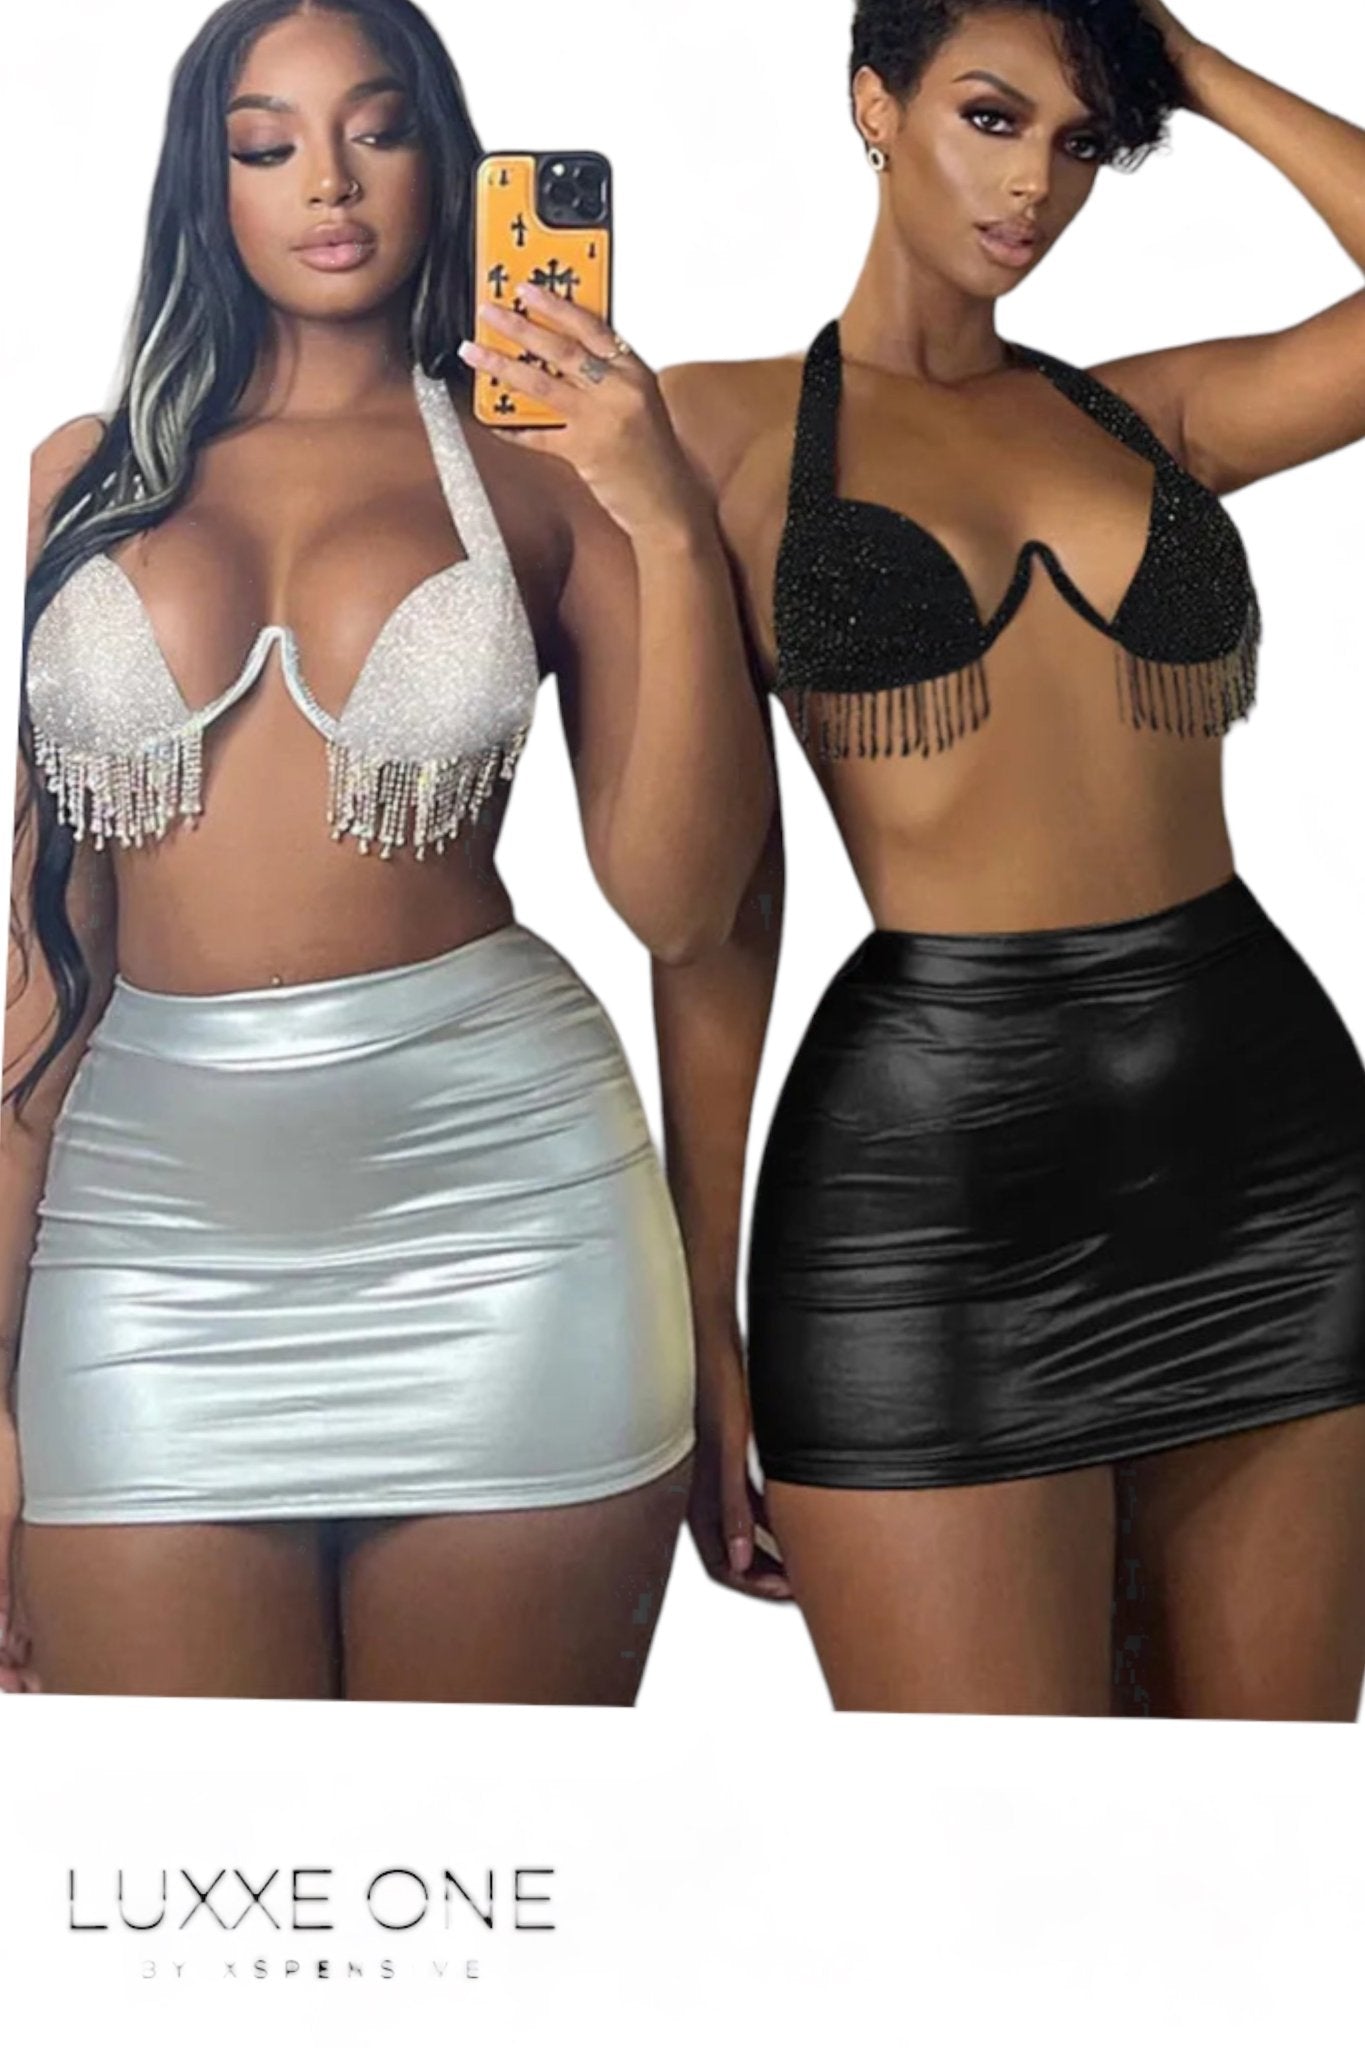 DRIPPING IN GLAMOUR SKIRT SET - Luxxe One